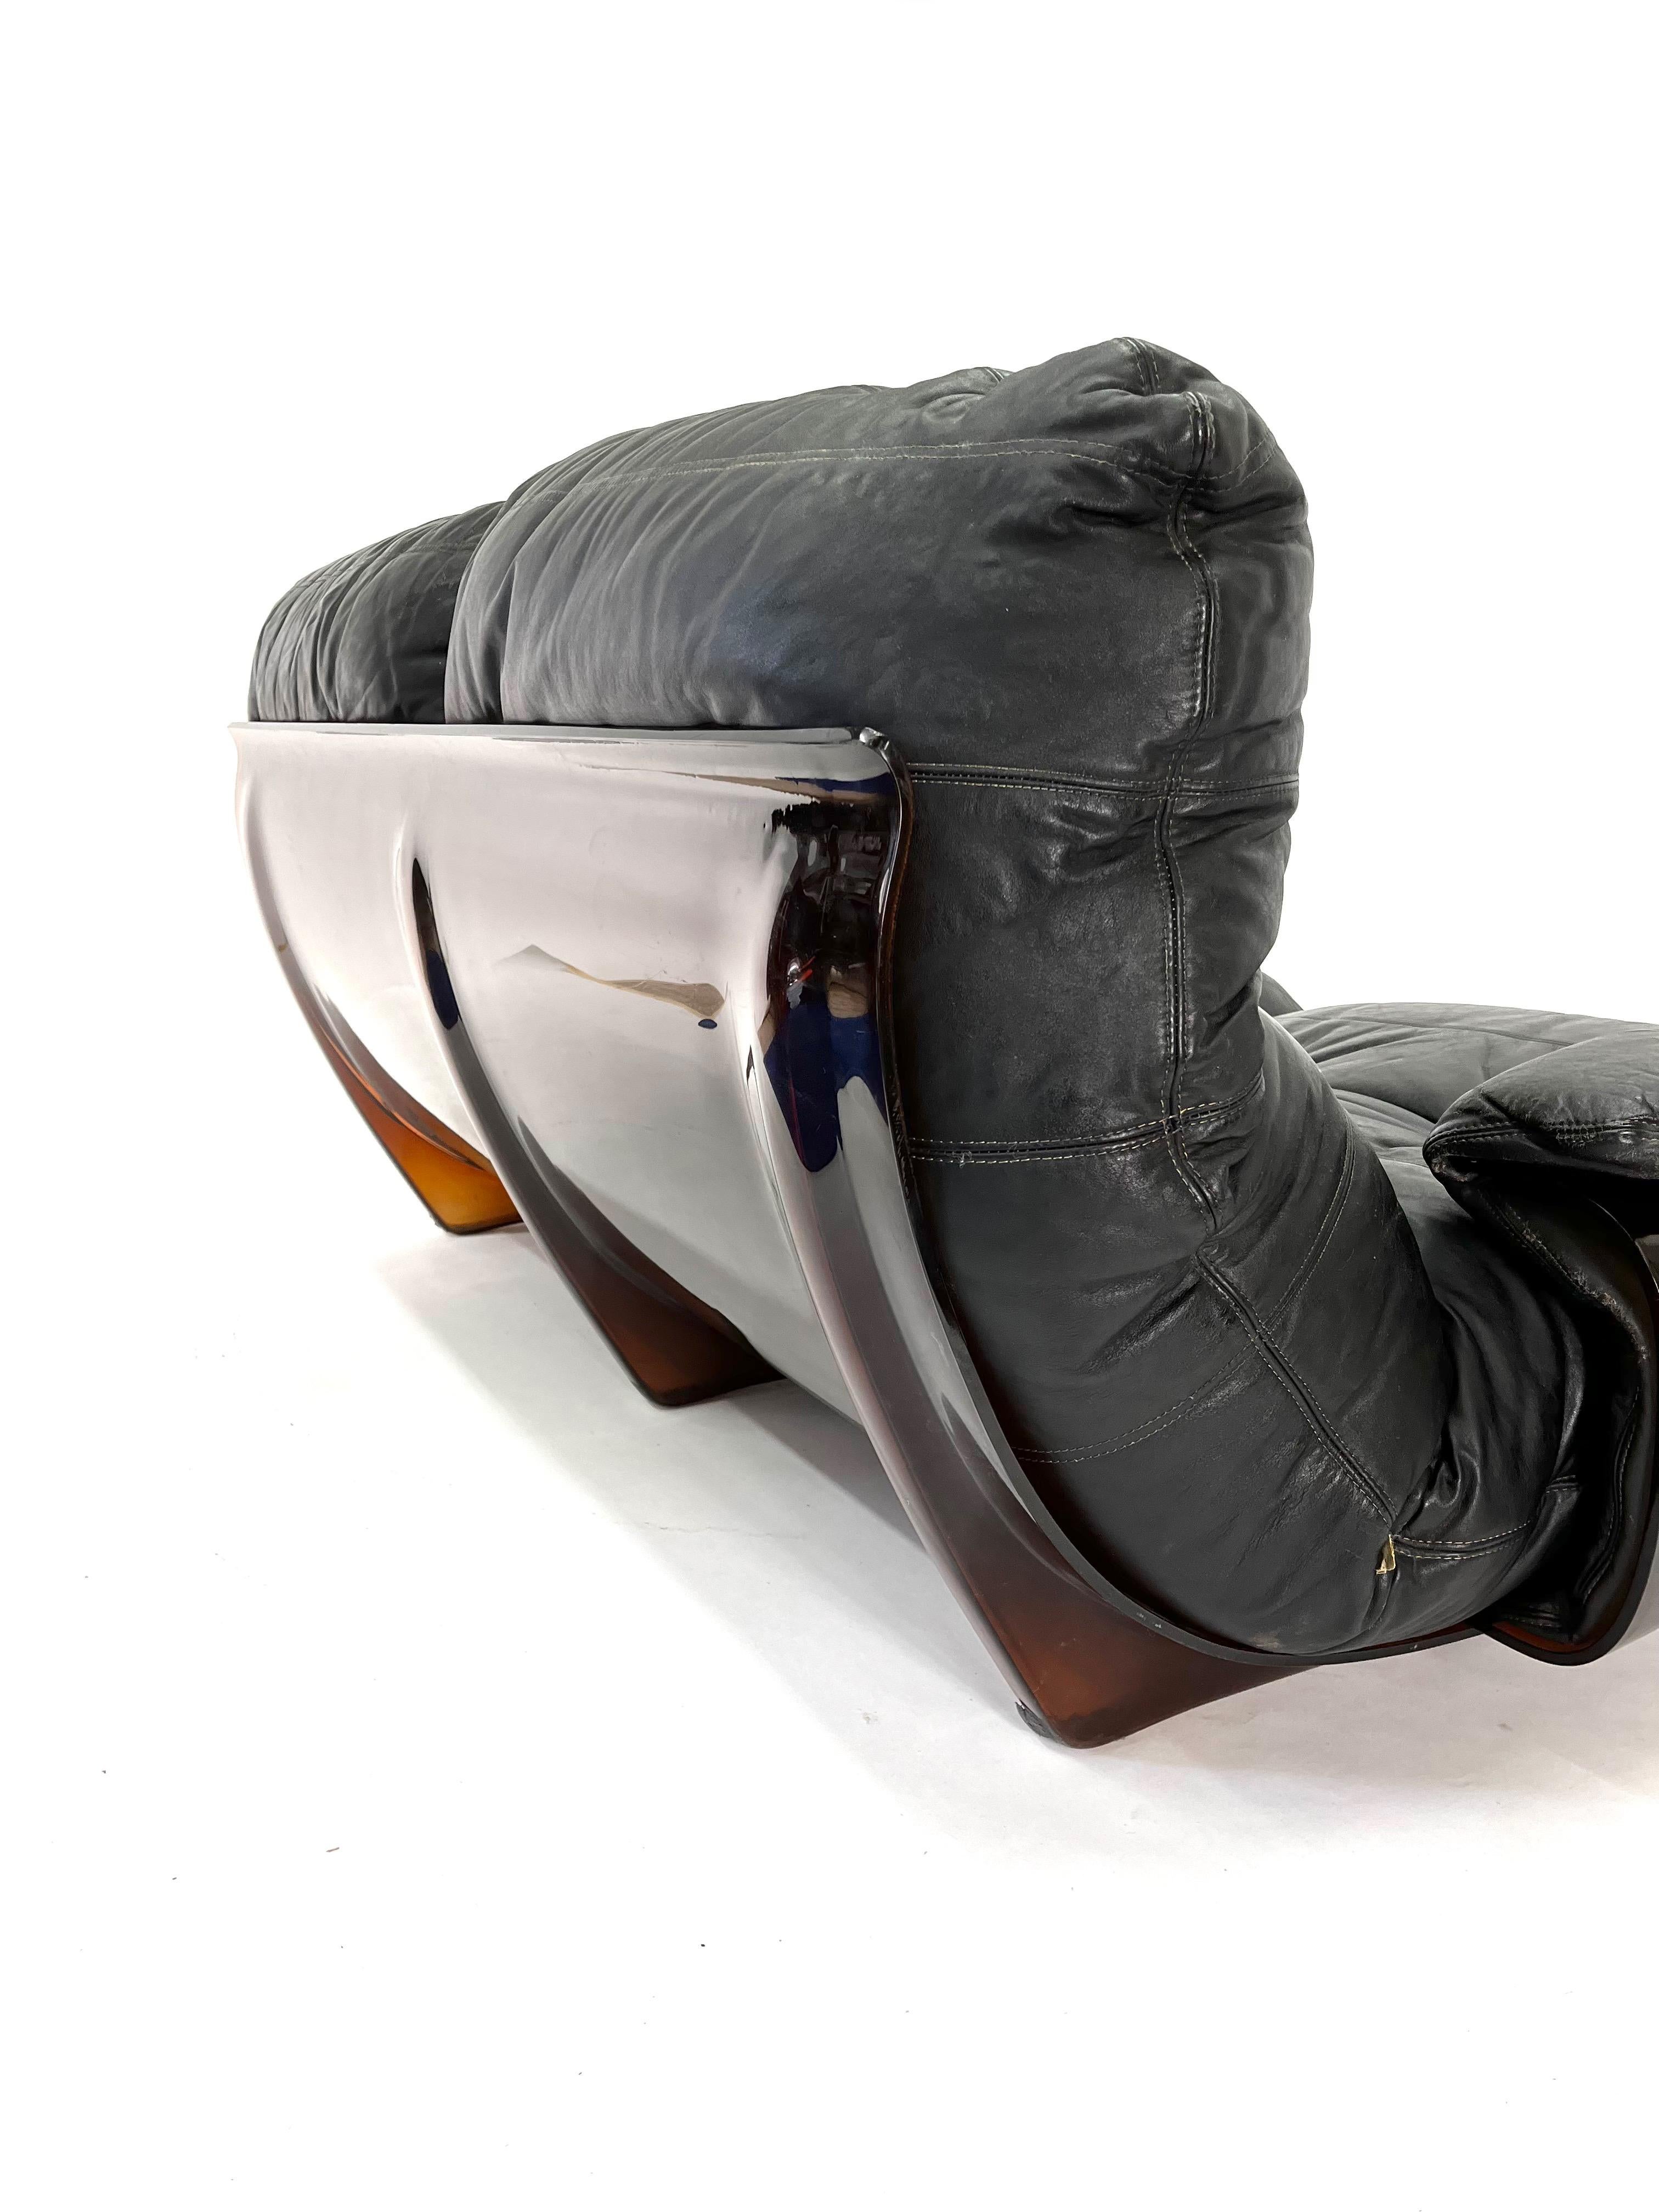 Lounge sofa designed by Michel Ducaroy, manufactured by Ligne Roset, France 1970. This is from the Marsala series and this has a brown plexiglass base and very cosy black leather cushions. Super comfortable lounge sofa in high quality leather.